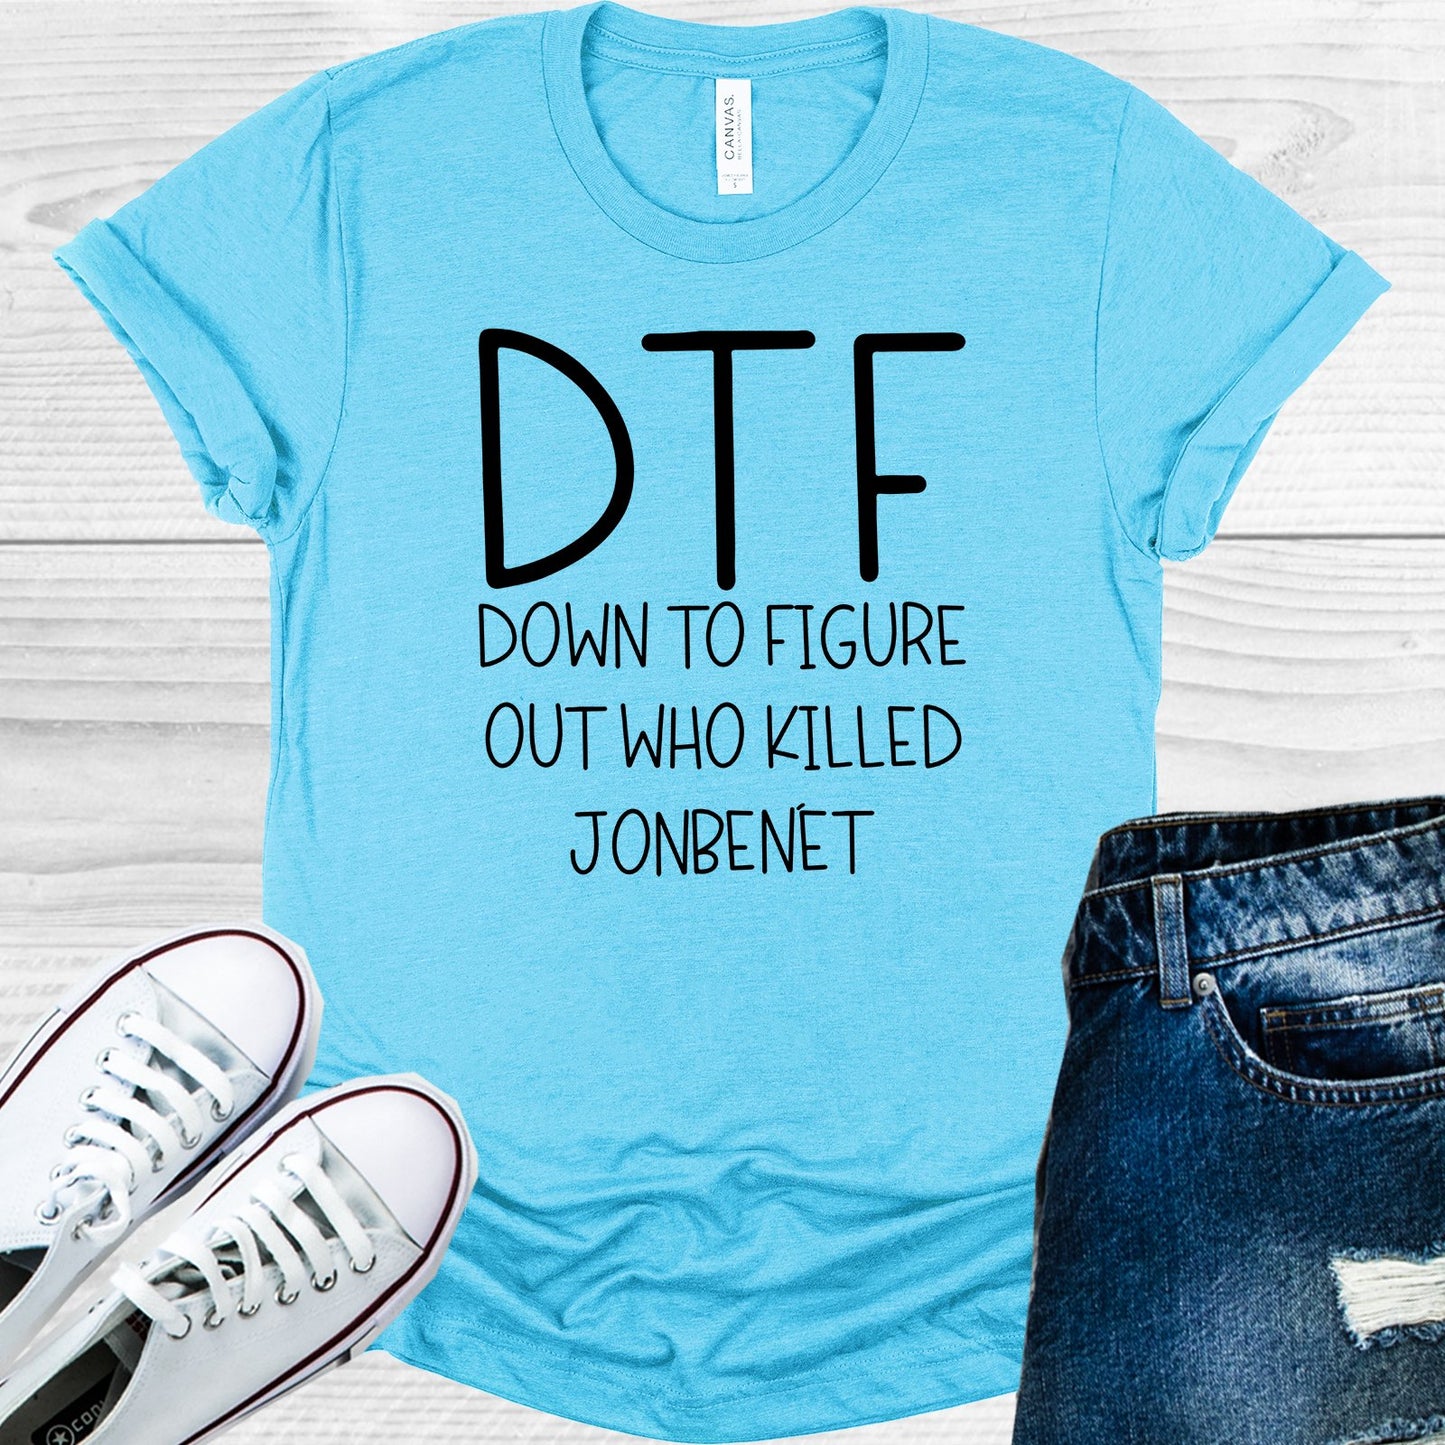 Dtf Down To Figure Out Who Killed Jonbenet Graphic Tee Graphic Tee